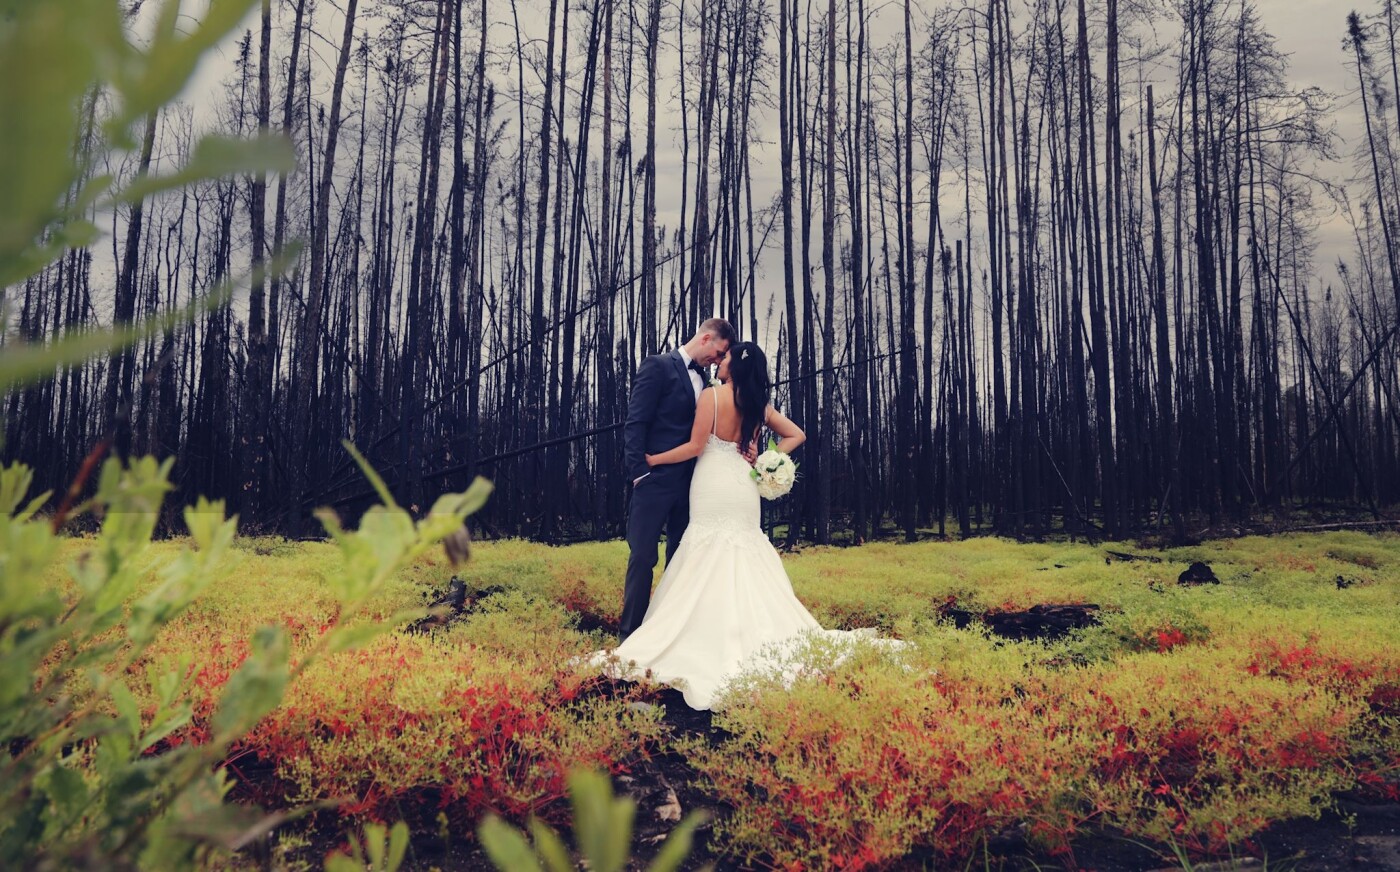 Brandon and Jenny's wedding was on a rainy and wet day in LaRonge Saskatchewan. Last year fires swept through the forests forcing many to evacuate their homes in LaRonge and around. When the groom mentioned the burned down forests I immediately knew that the forests were something I wanted in their wedding photos! They looked stunning against the black forest and new life growing from the ground up. It almost seemed symbolic as if it stood for the beginning of a new life! It was a fantastic day with two amazing and genuine people and their families, I could not have asked for and better couple to spend a rainy day in the forest with.